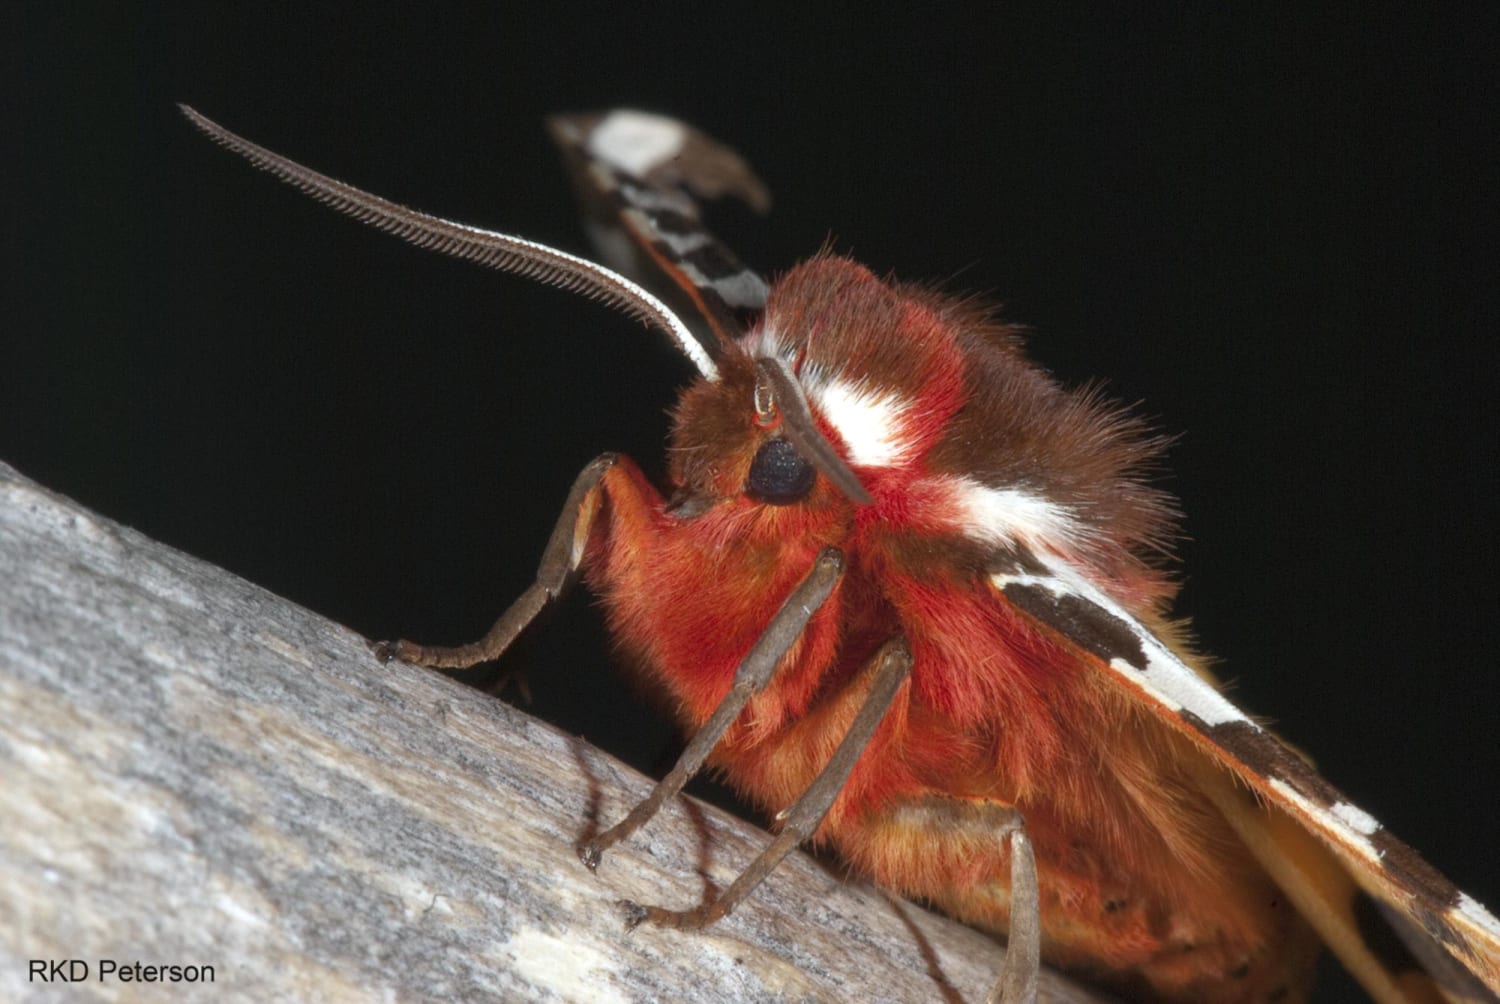 The tiger moth (Arctia caja) is able to jam echolocation used by predatory bats by making sounds with their wings. This will prevent the bat from "seeing" the moth. Very clever!